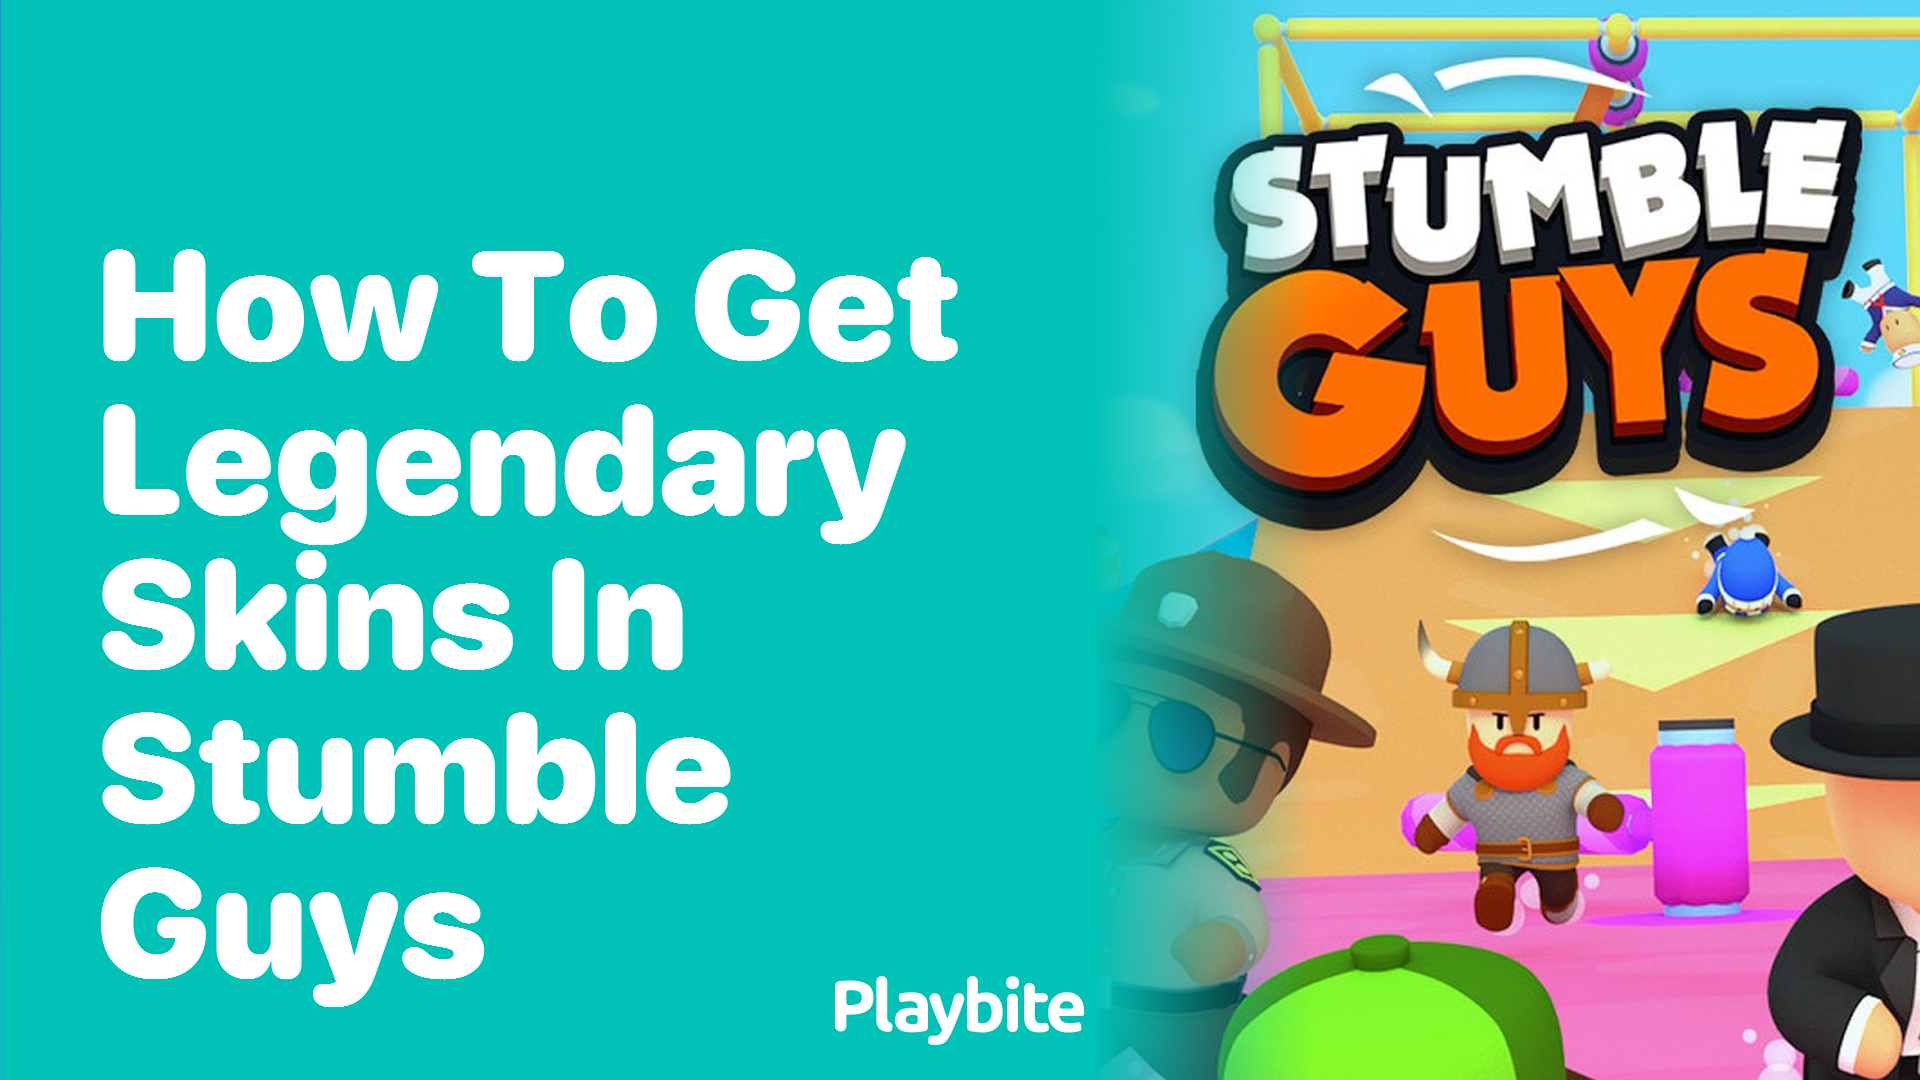 How to Get Legendary Skins in Stumble Guys